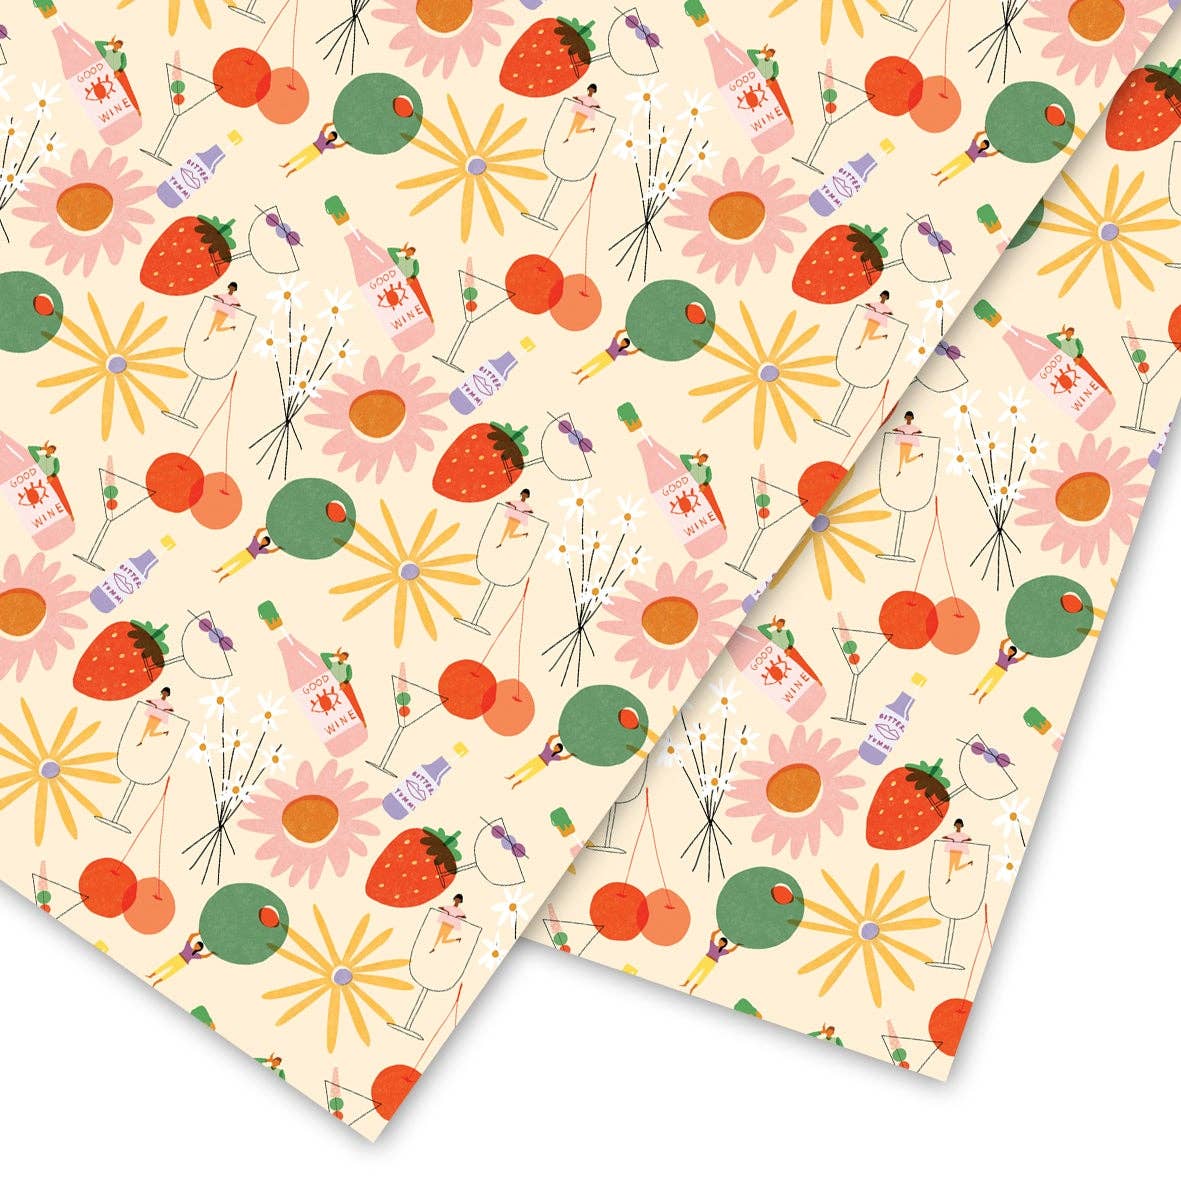 Sheets of wrapping paper --- design is vibrant colored flowers, strawberries, olives, cherries, various cocktail glasses and wine bottles on a mostly white background.